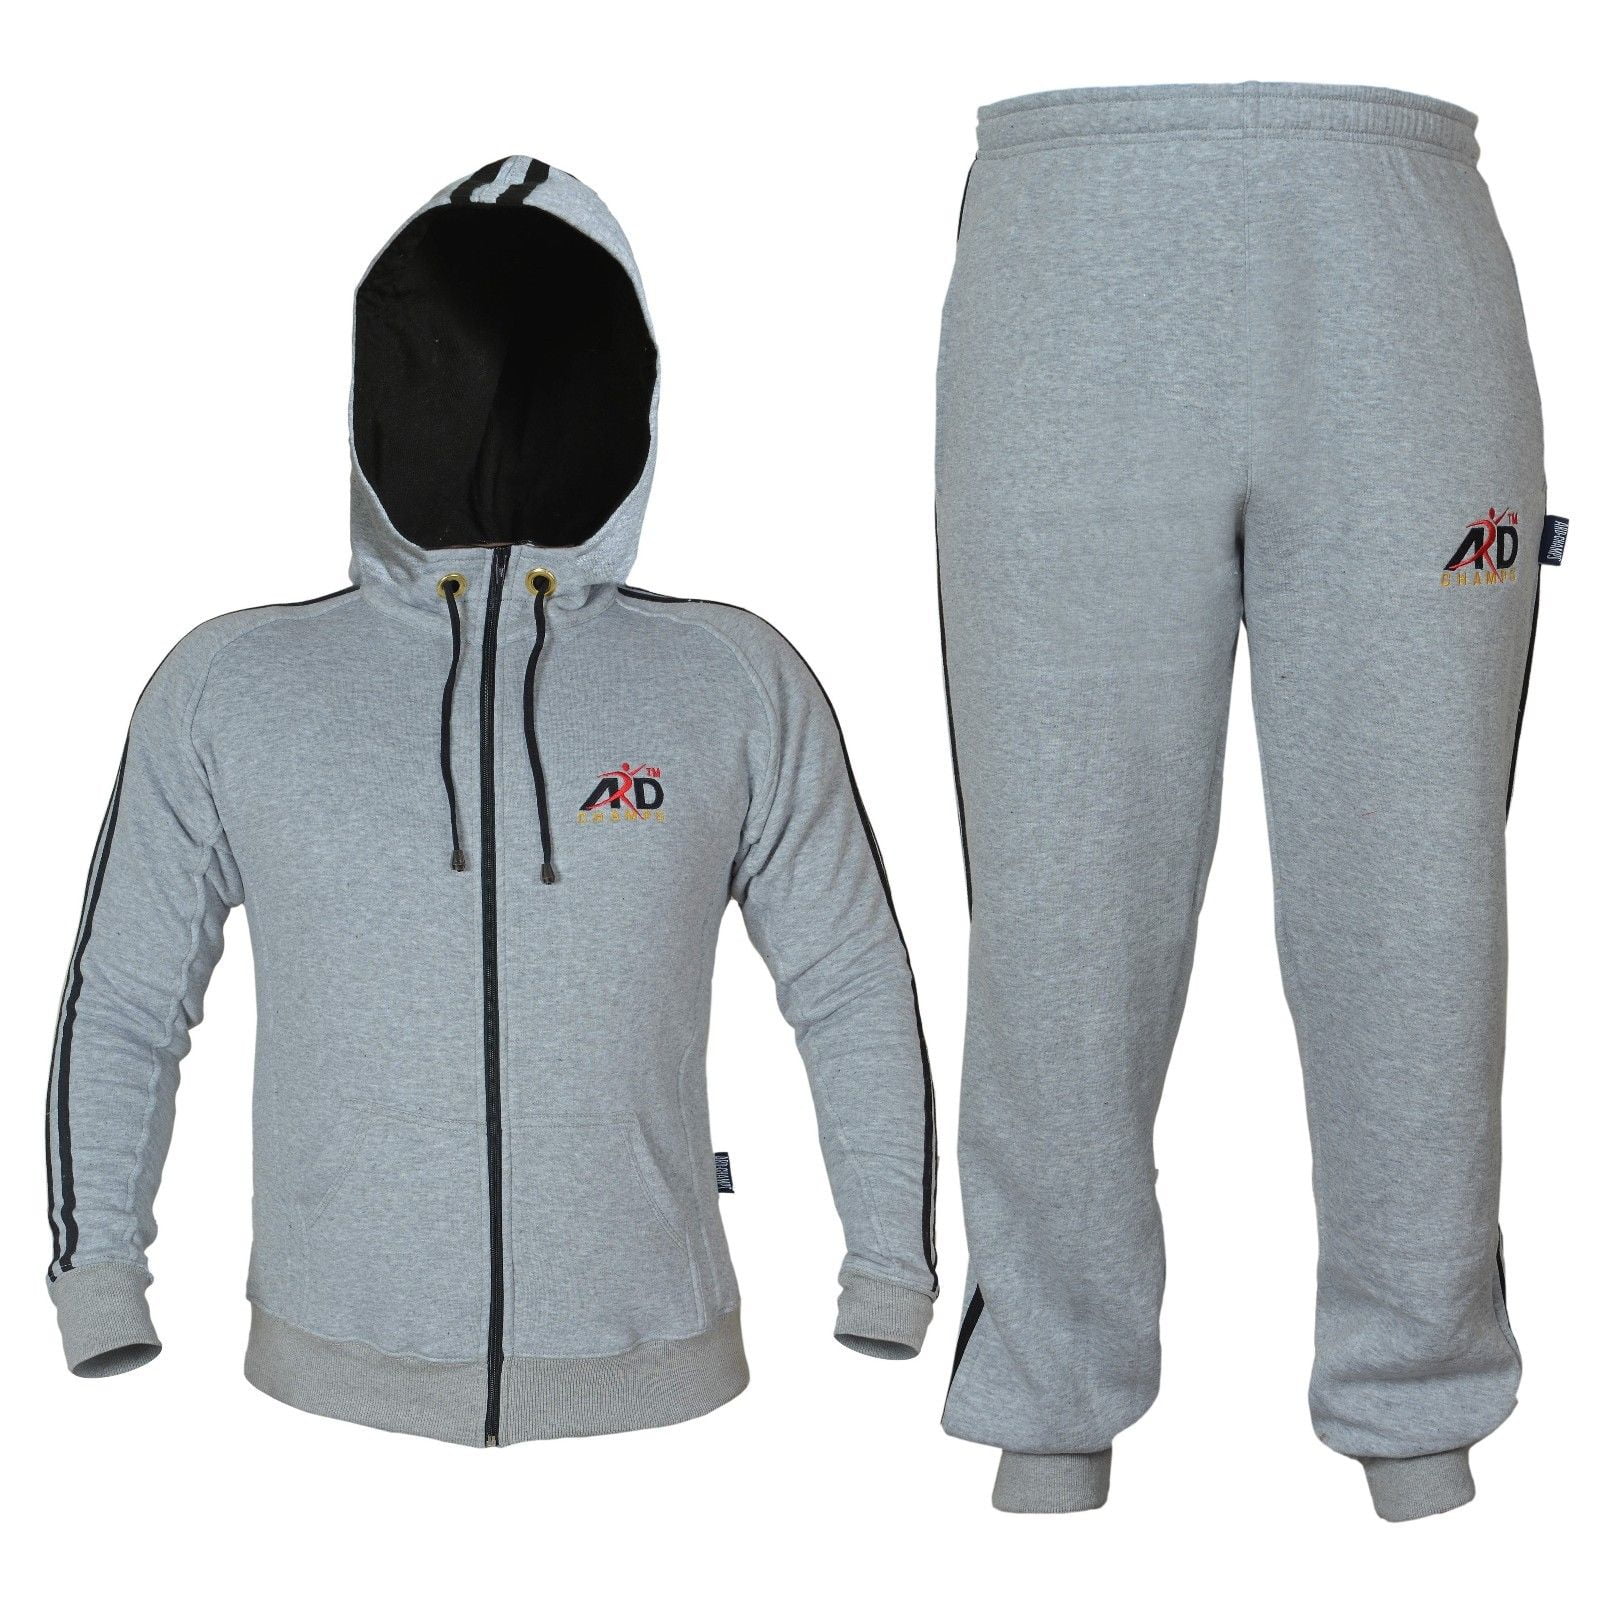 ARD CHAMPS™ Fleece Trouser sweatpants MMA Gym Boxing Running Jogging Trousers 